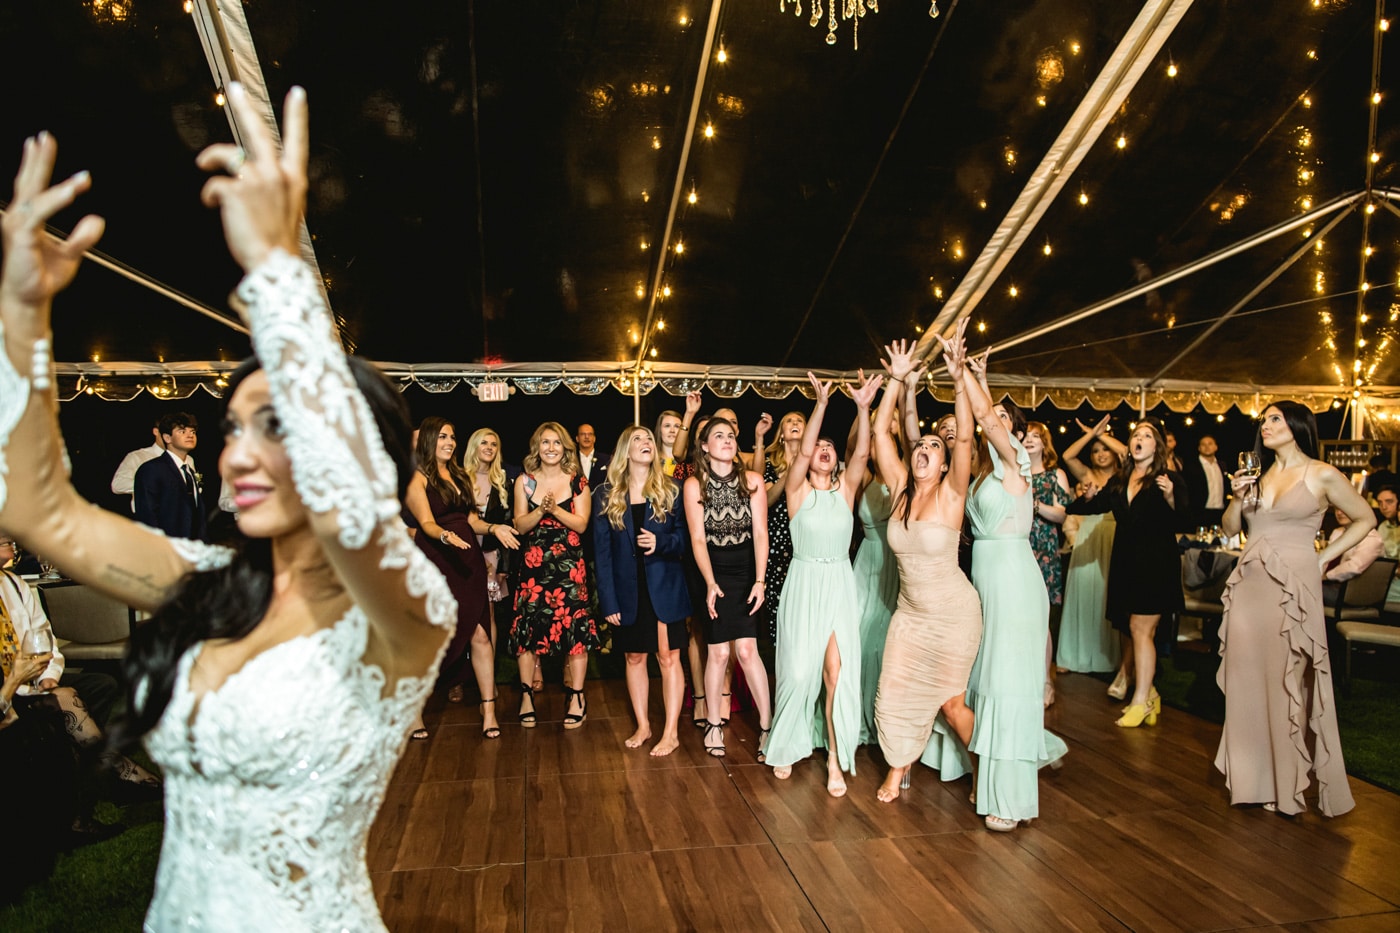 Ladies trying to catch bouquet toss at reception